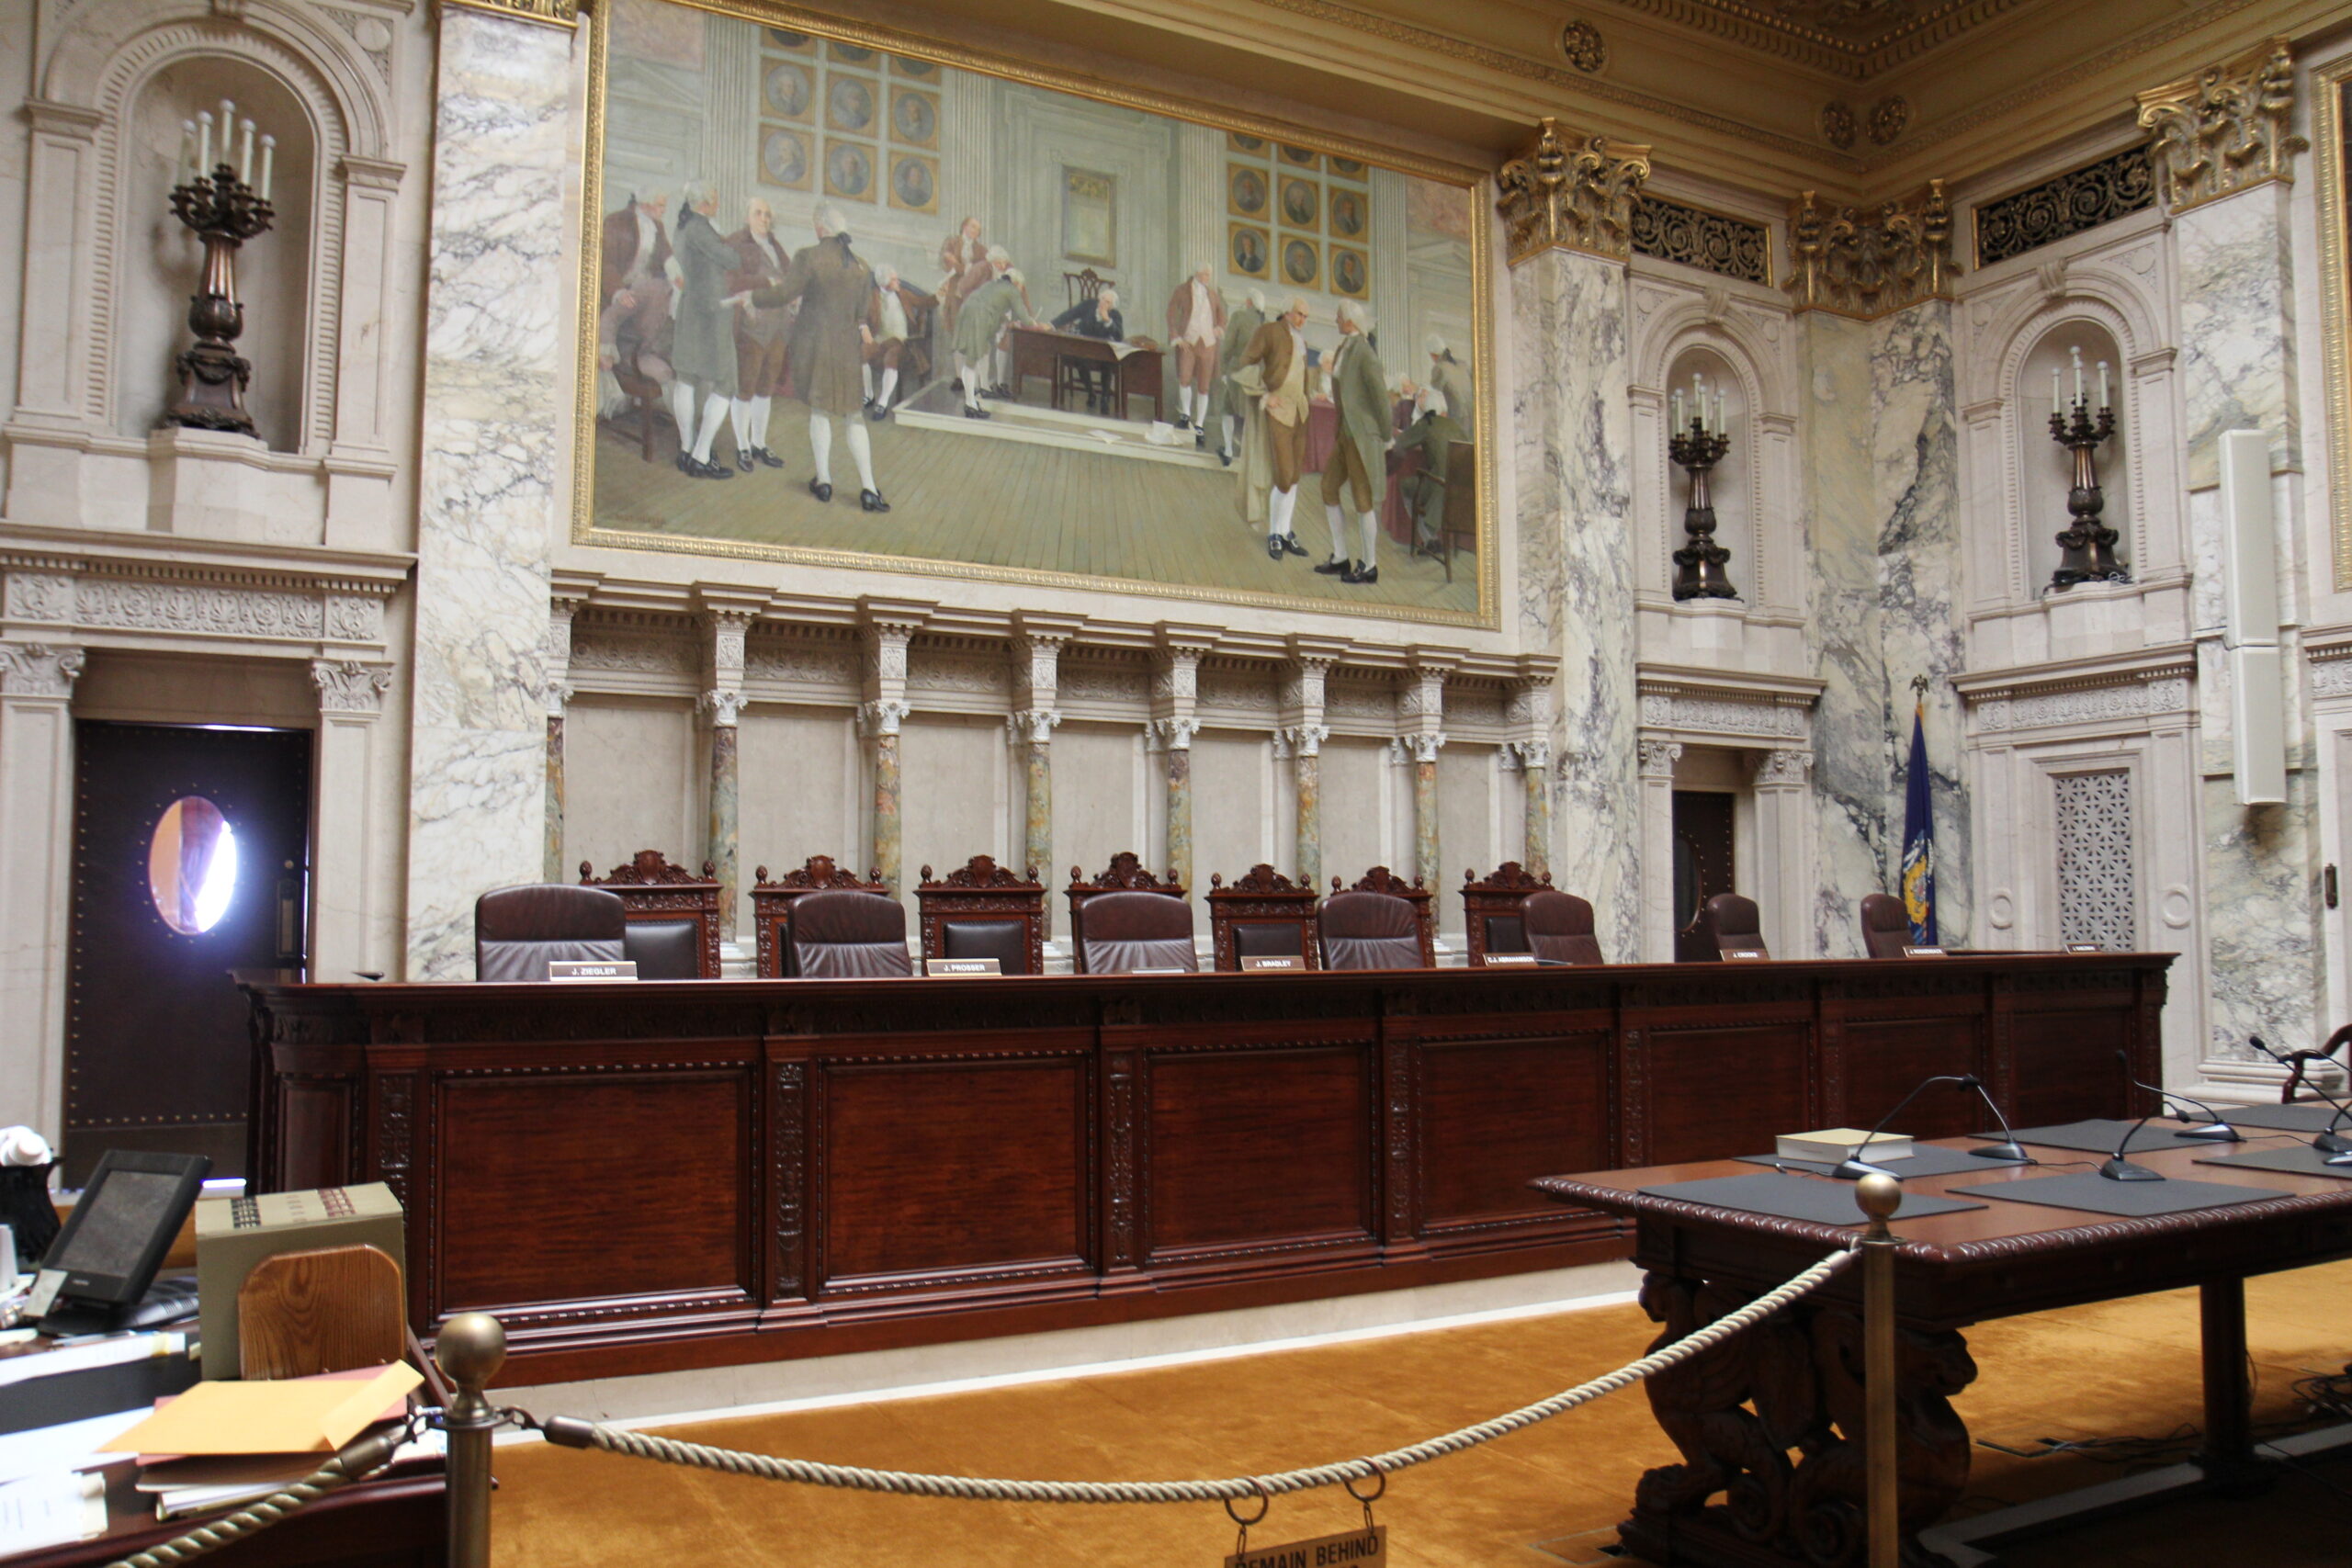 Photo of the inside of Wisconsin's Supreme Court building.